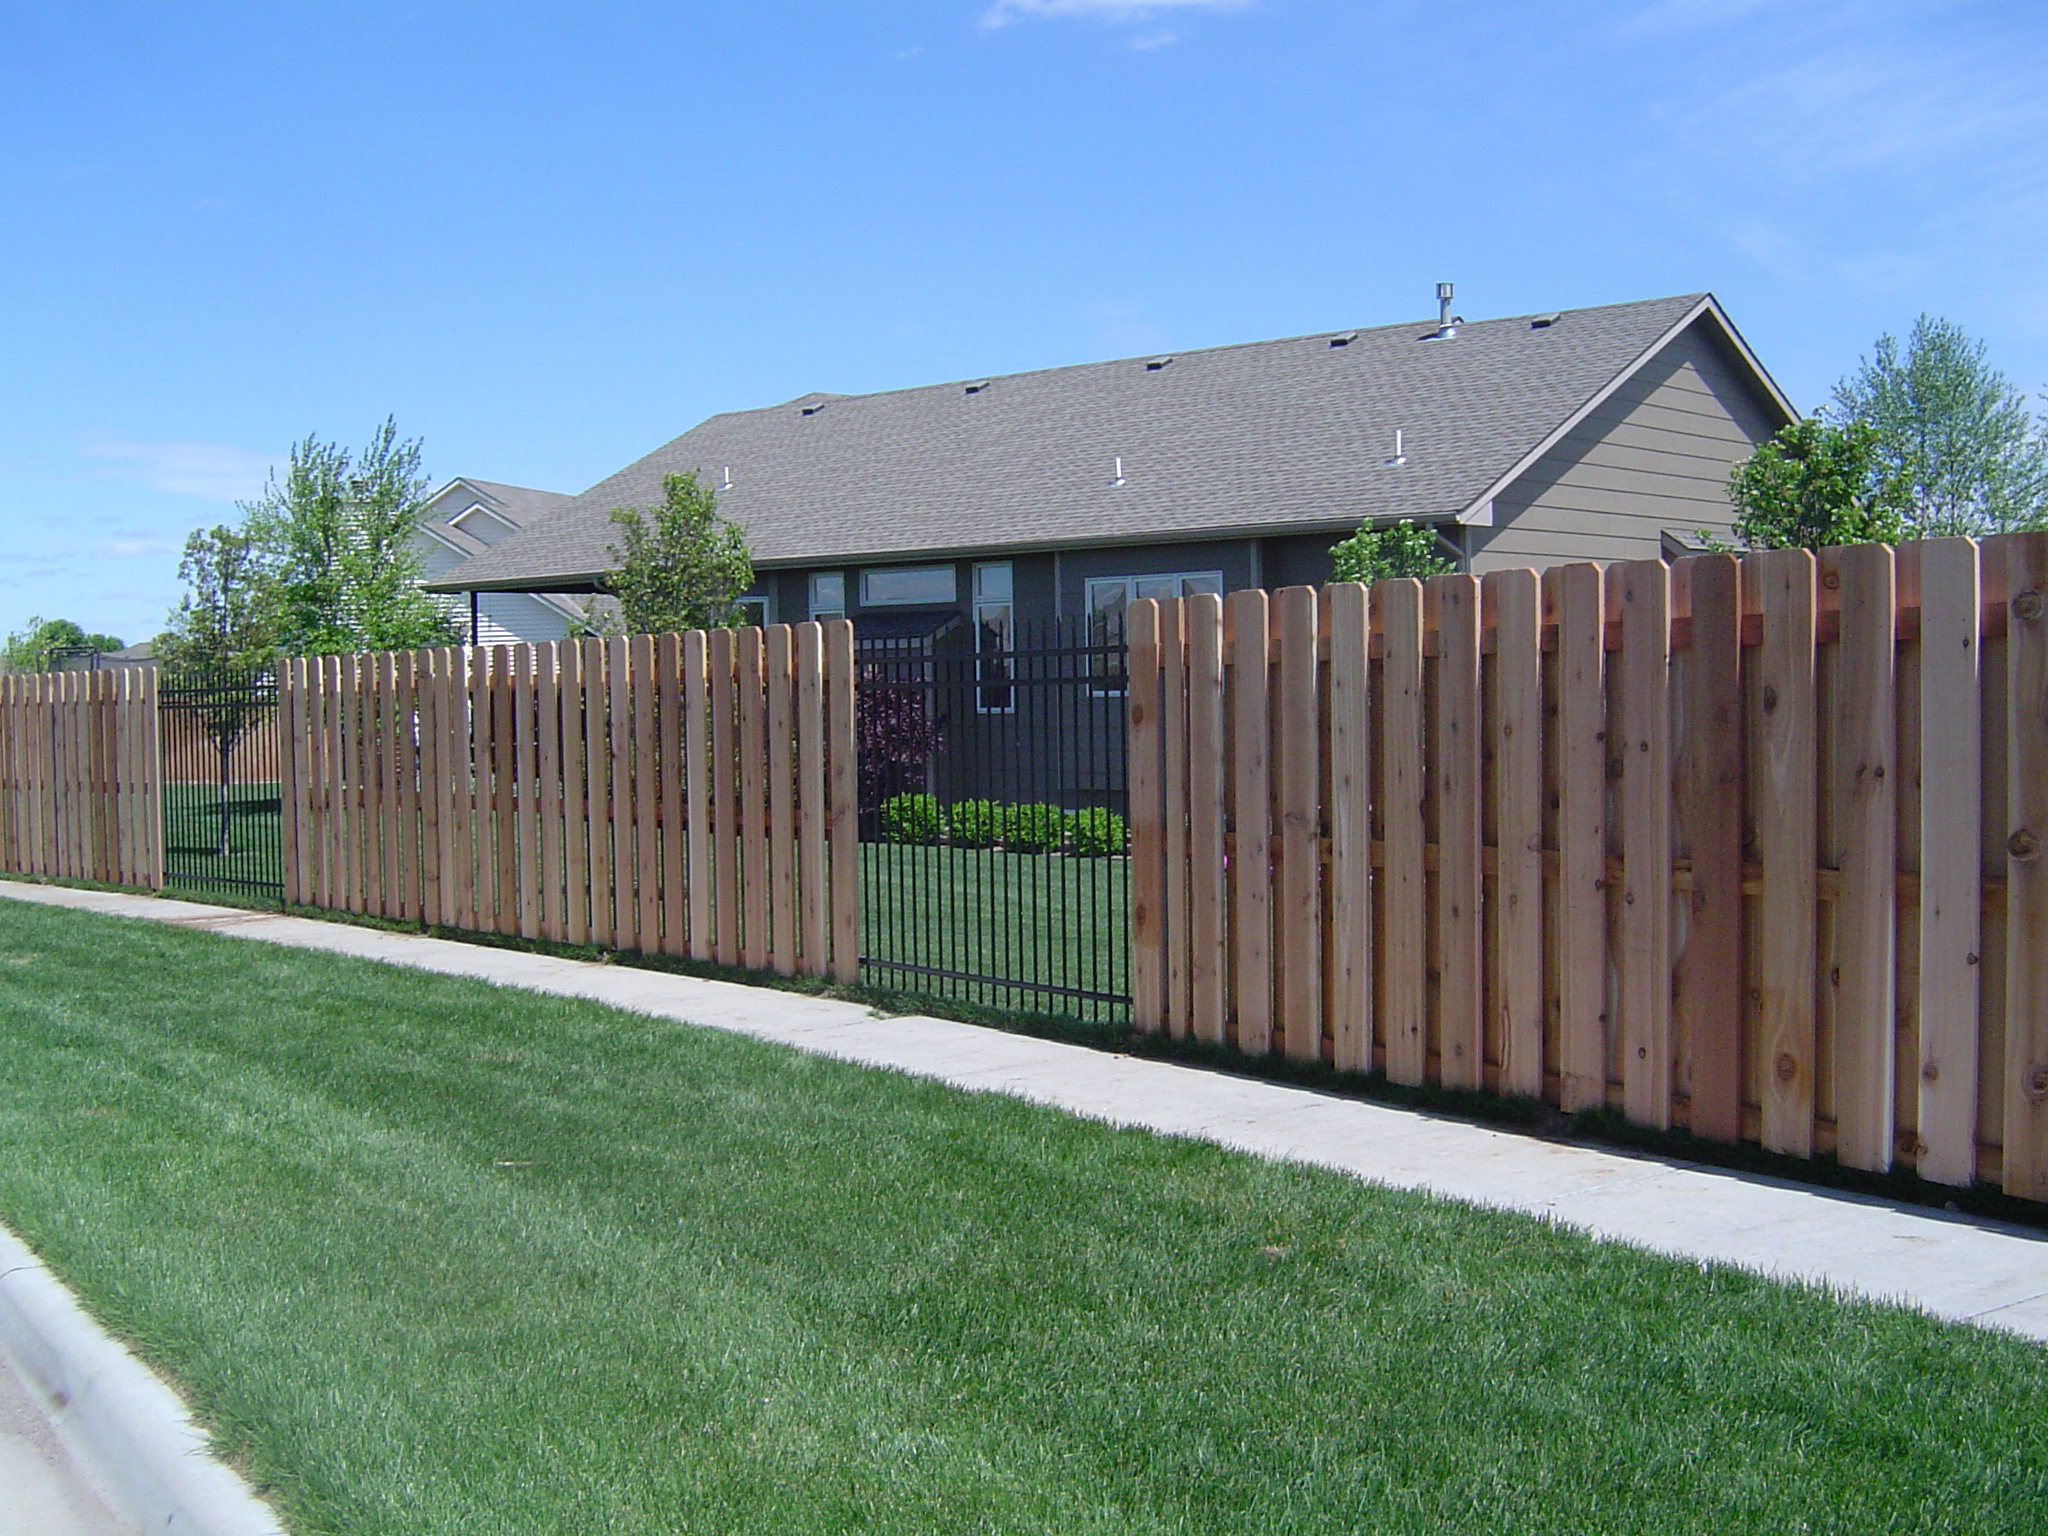 How to Replace a Broken Fence Panel